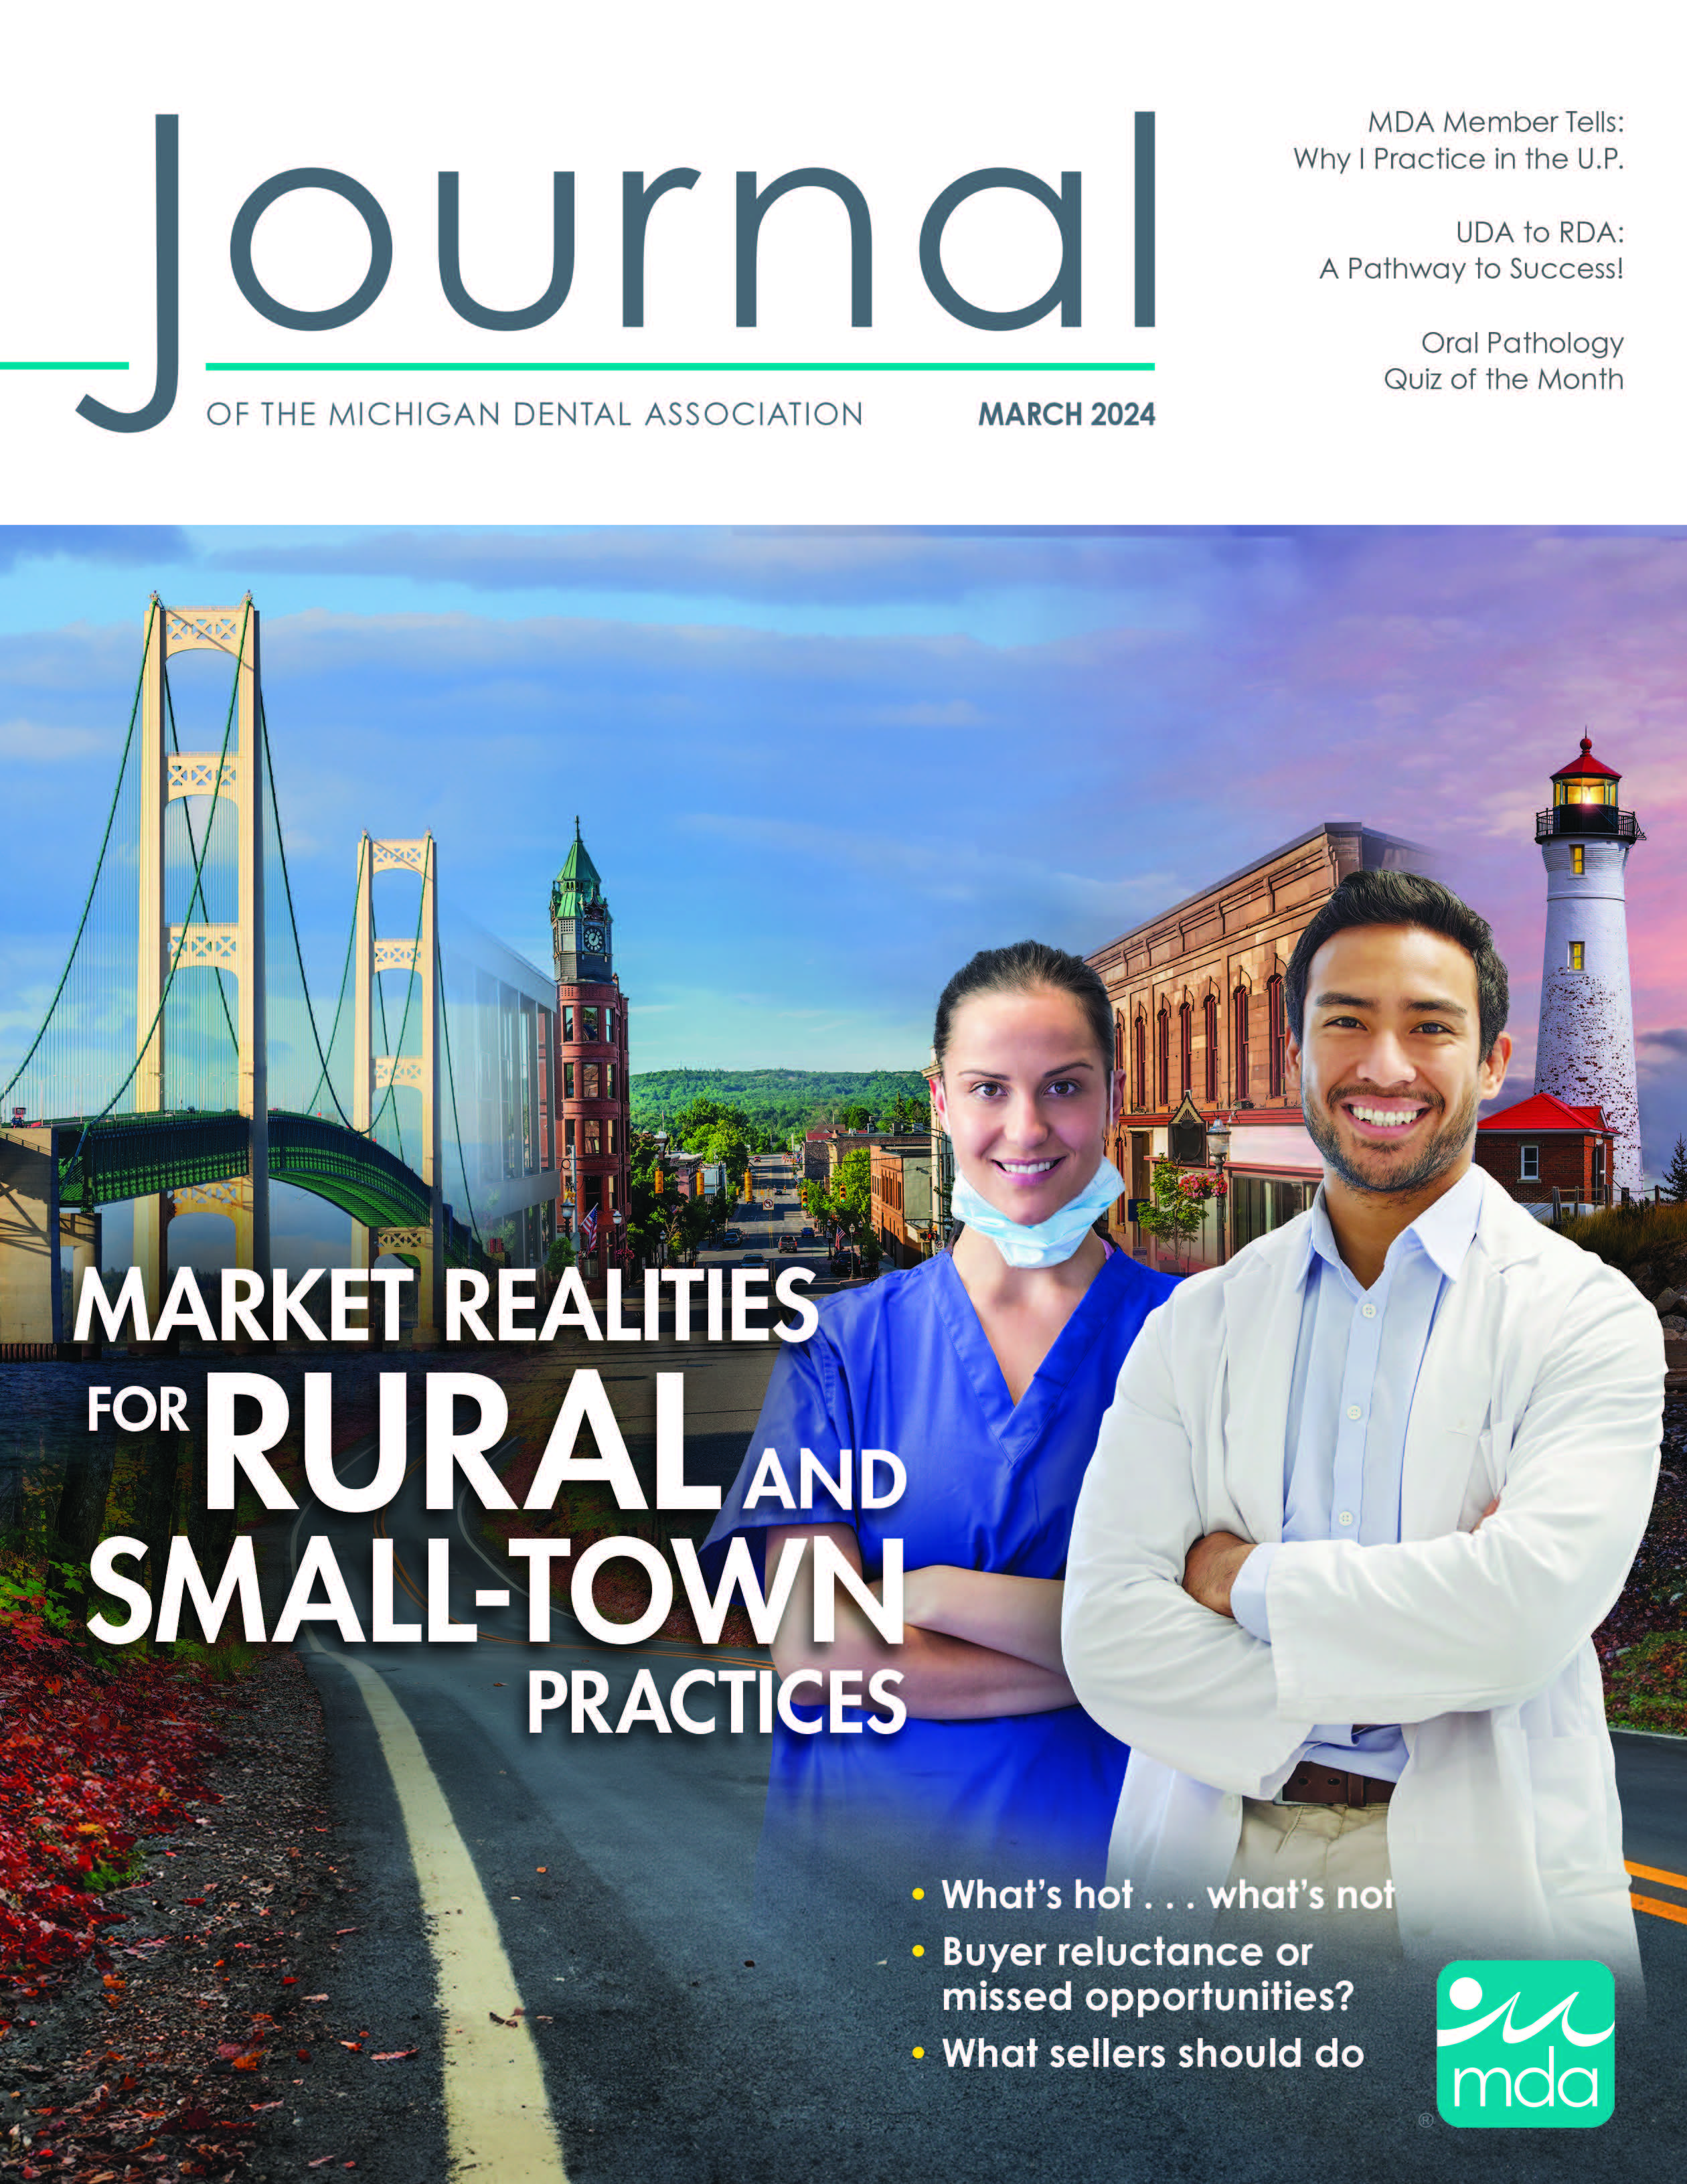 Cover of the Journal of the Michigan Dental Association with two smiling dentists in front of a variety of urban and rural landscapes